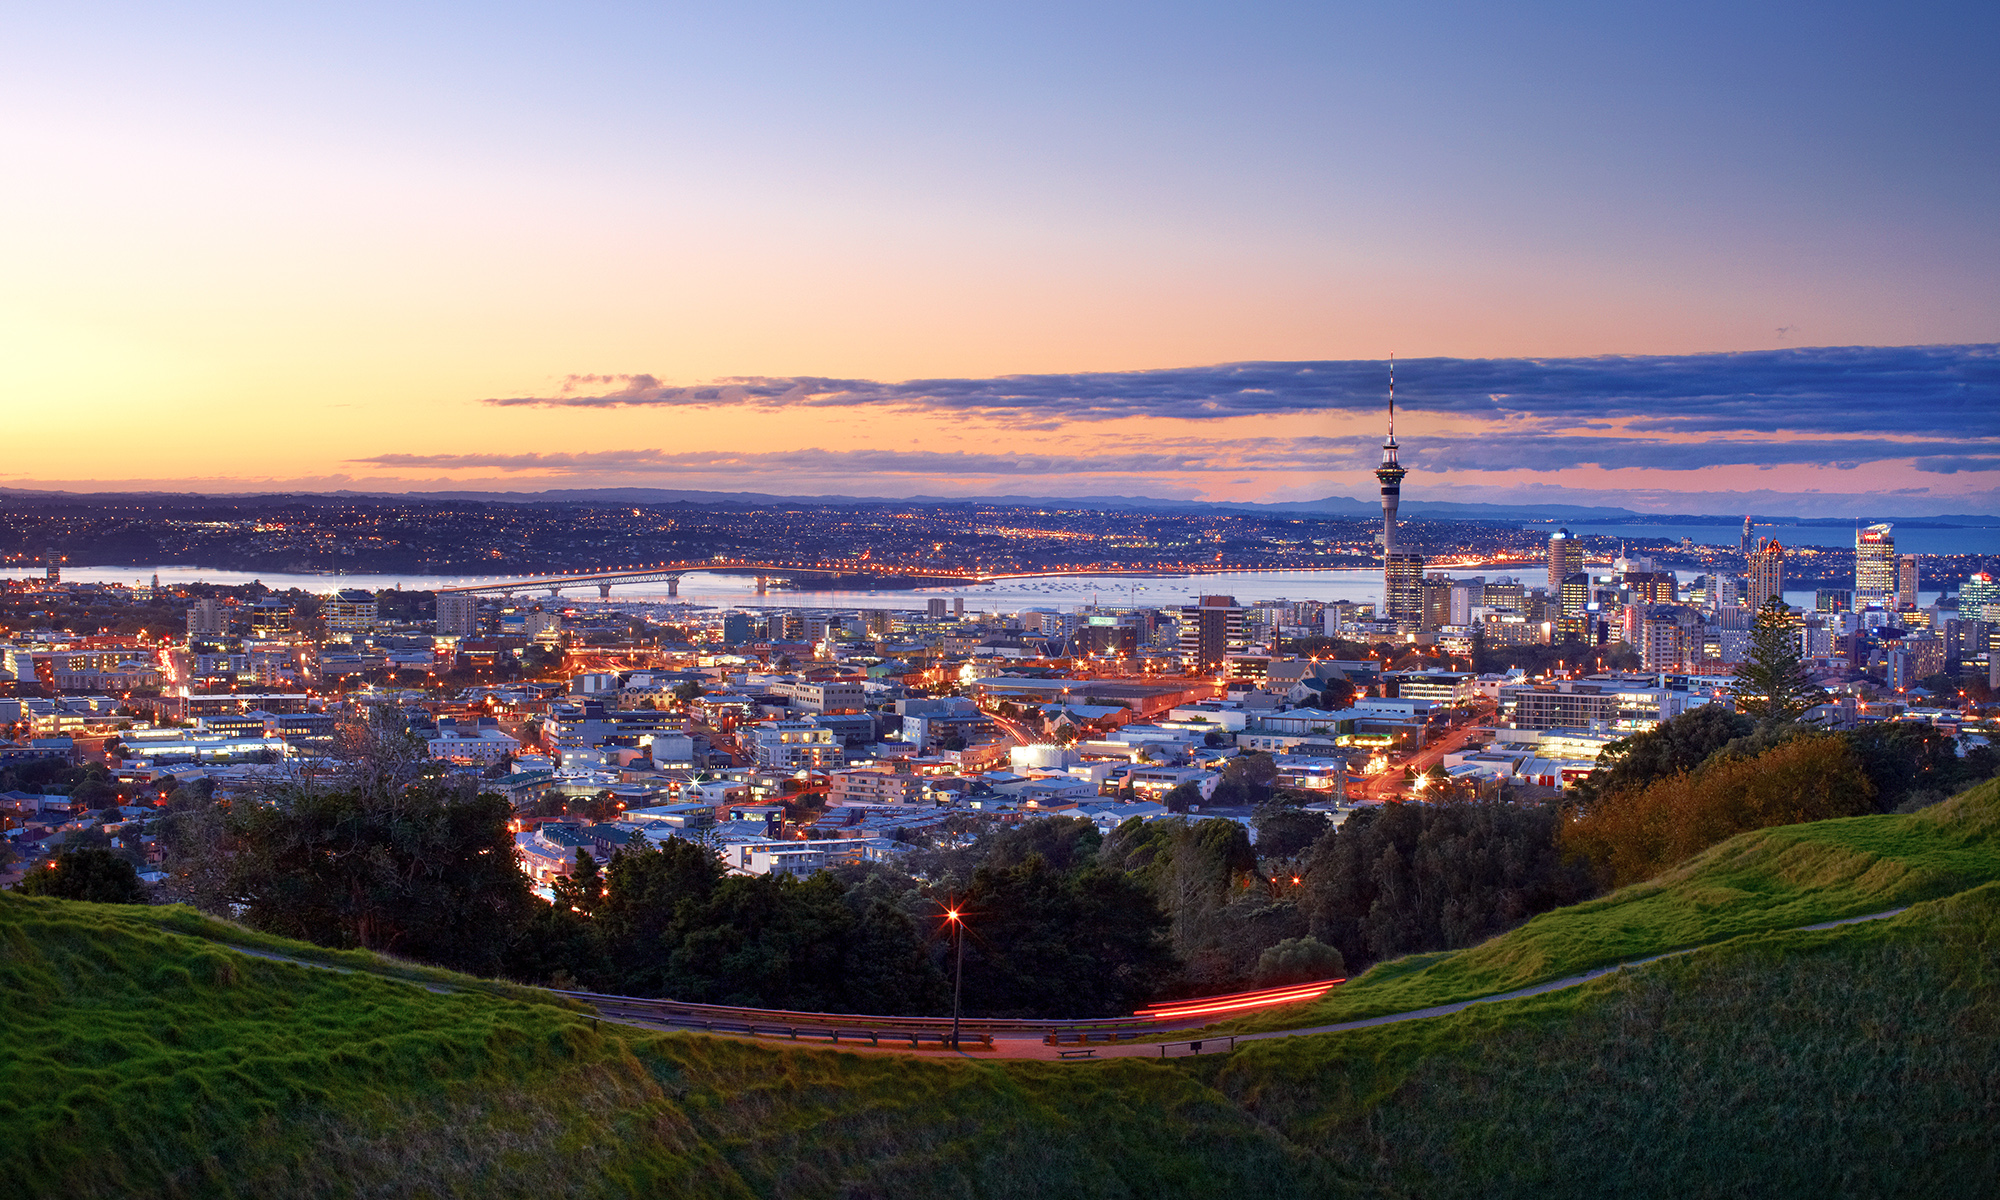 Overview of Auckland city at night, taken from to top of a mountain.